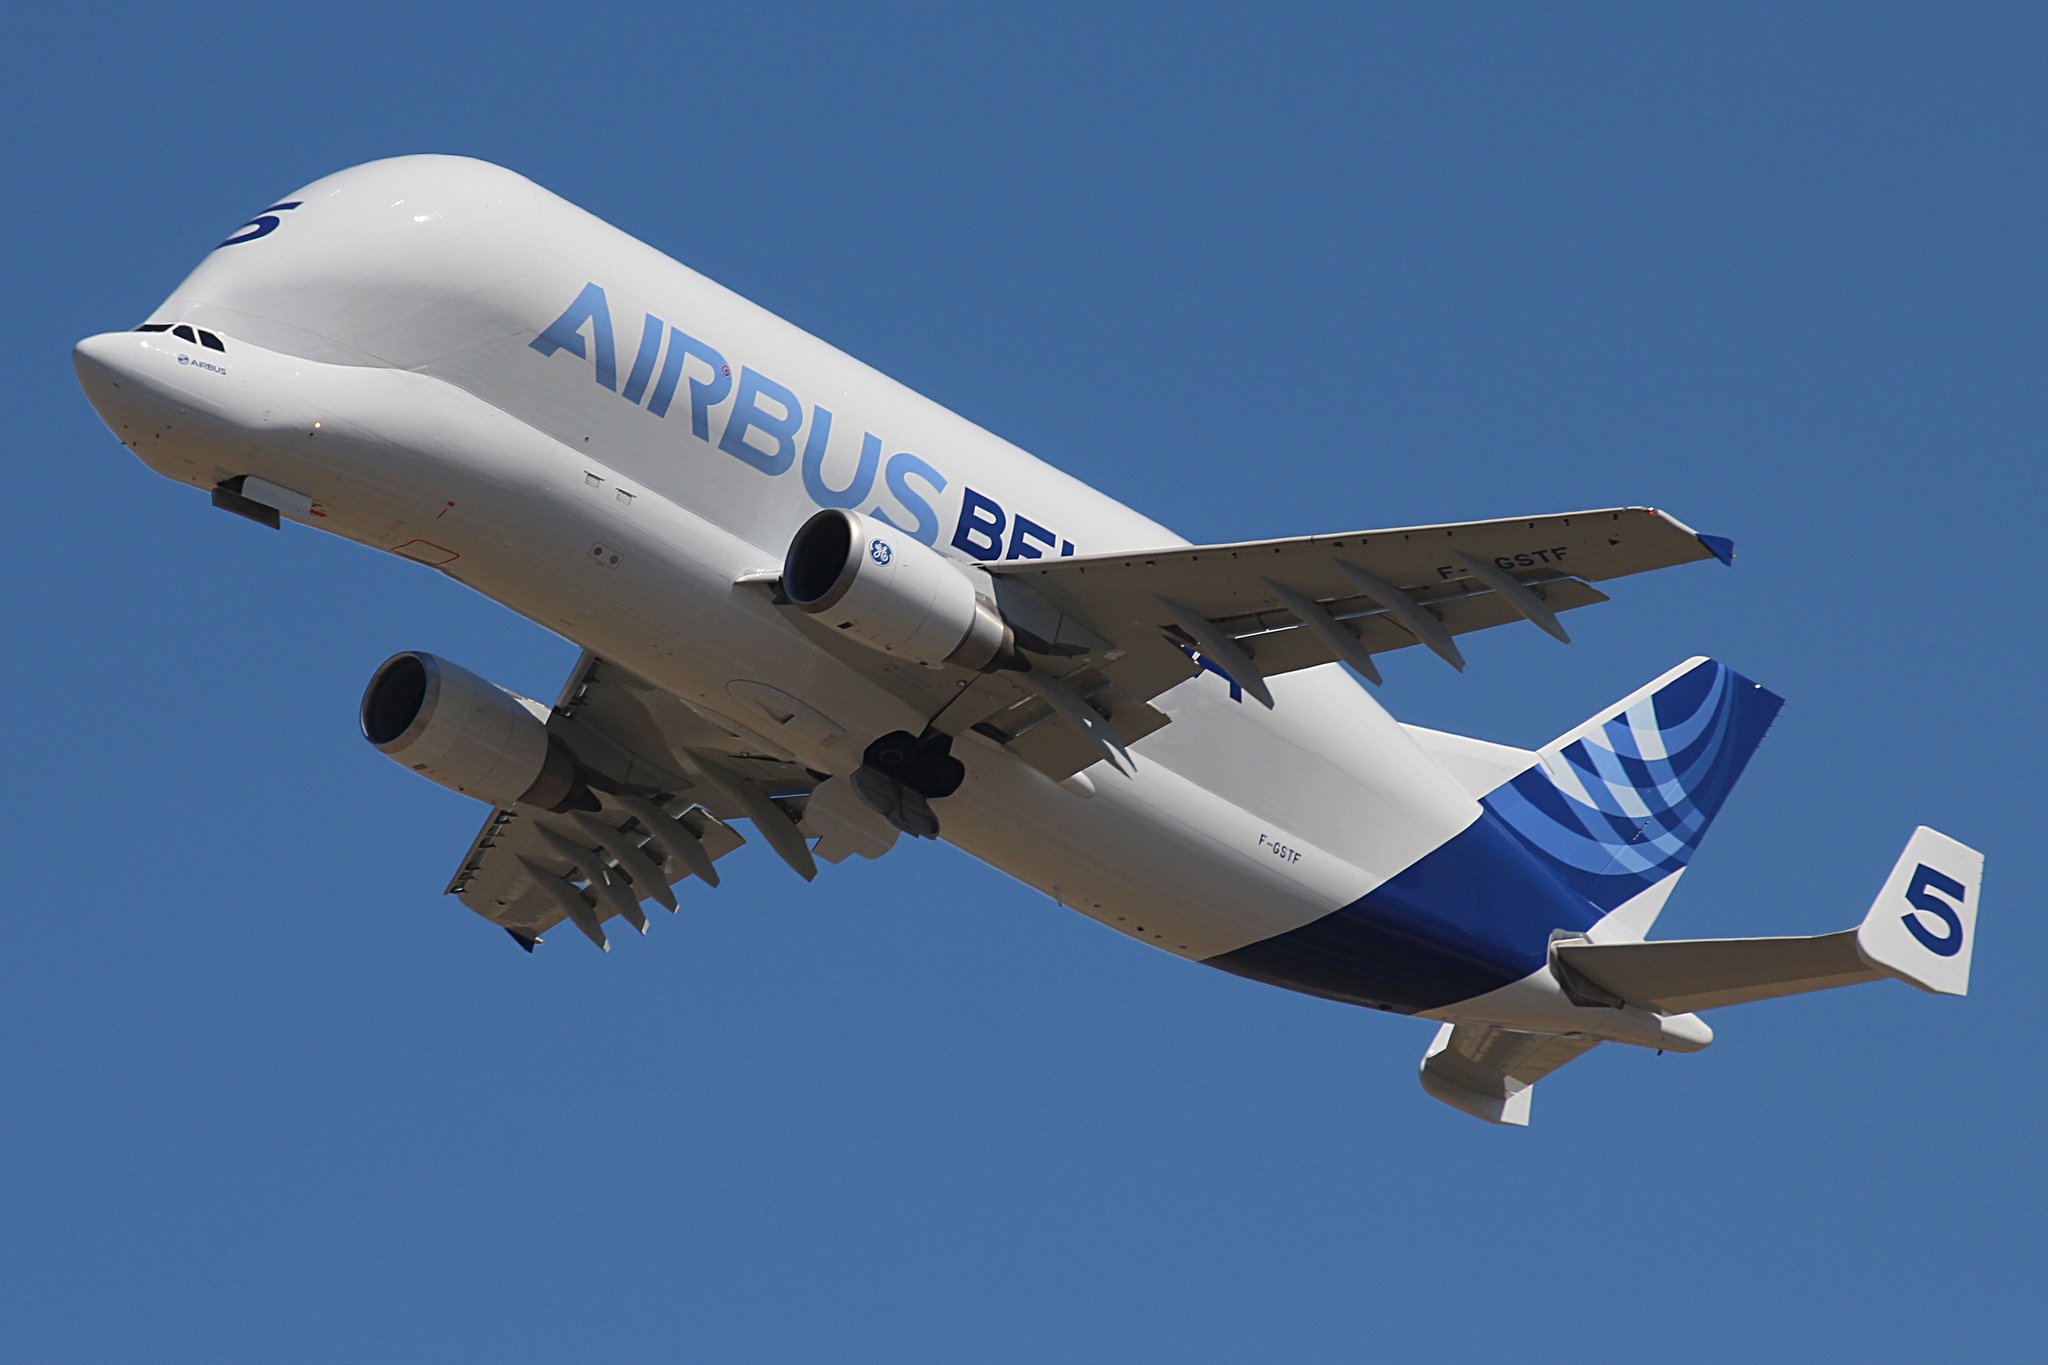 airbus, Beluga, A300, 600st, Cargo, Aircrafts, Airliner, Airplane